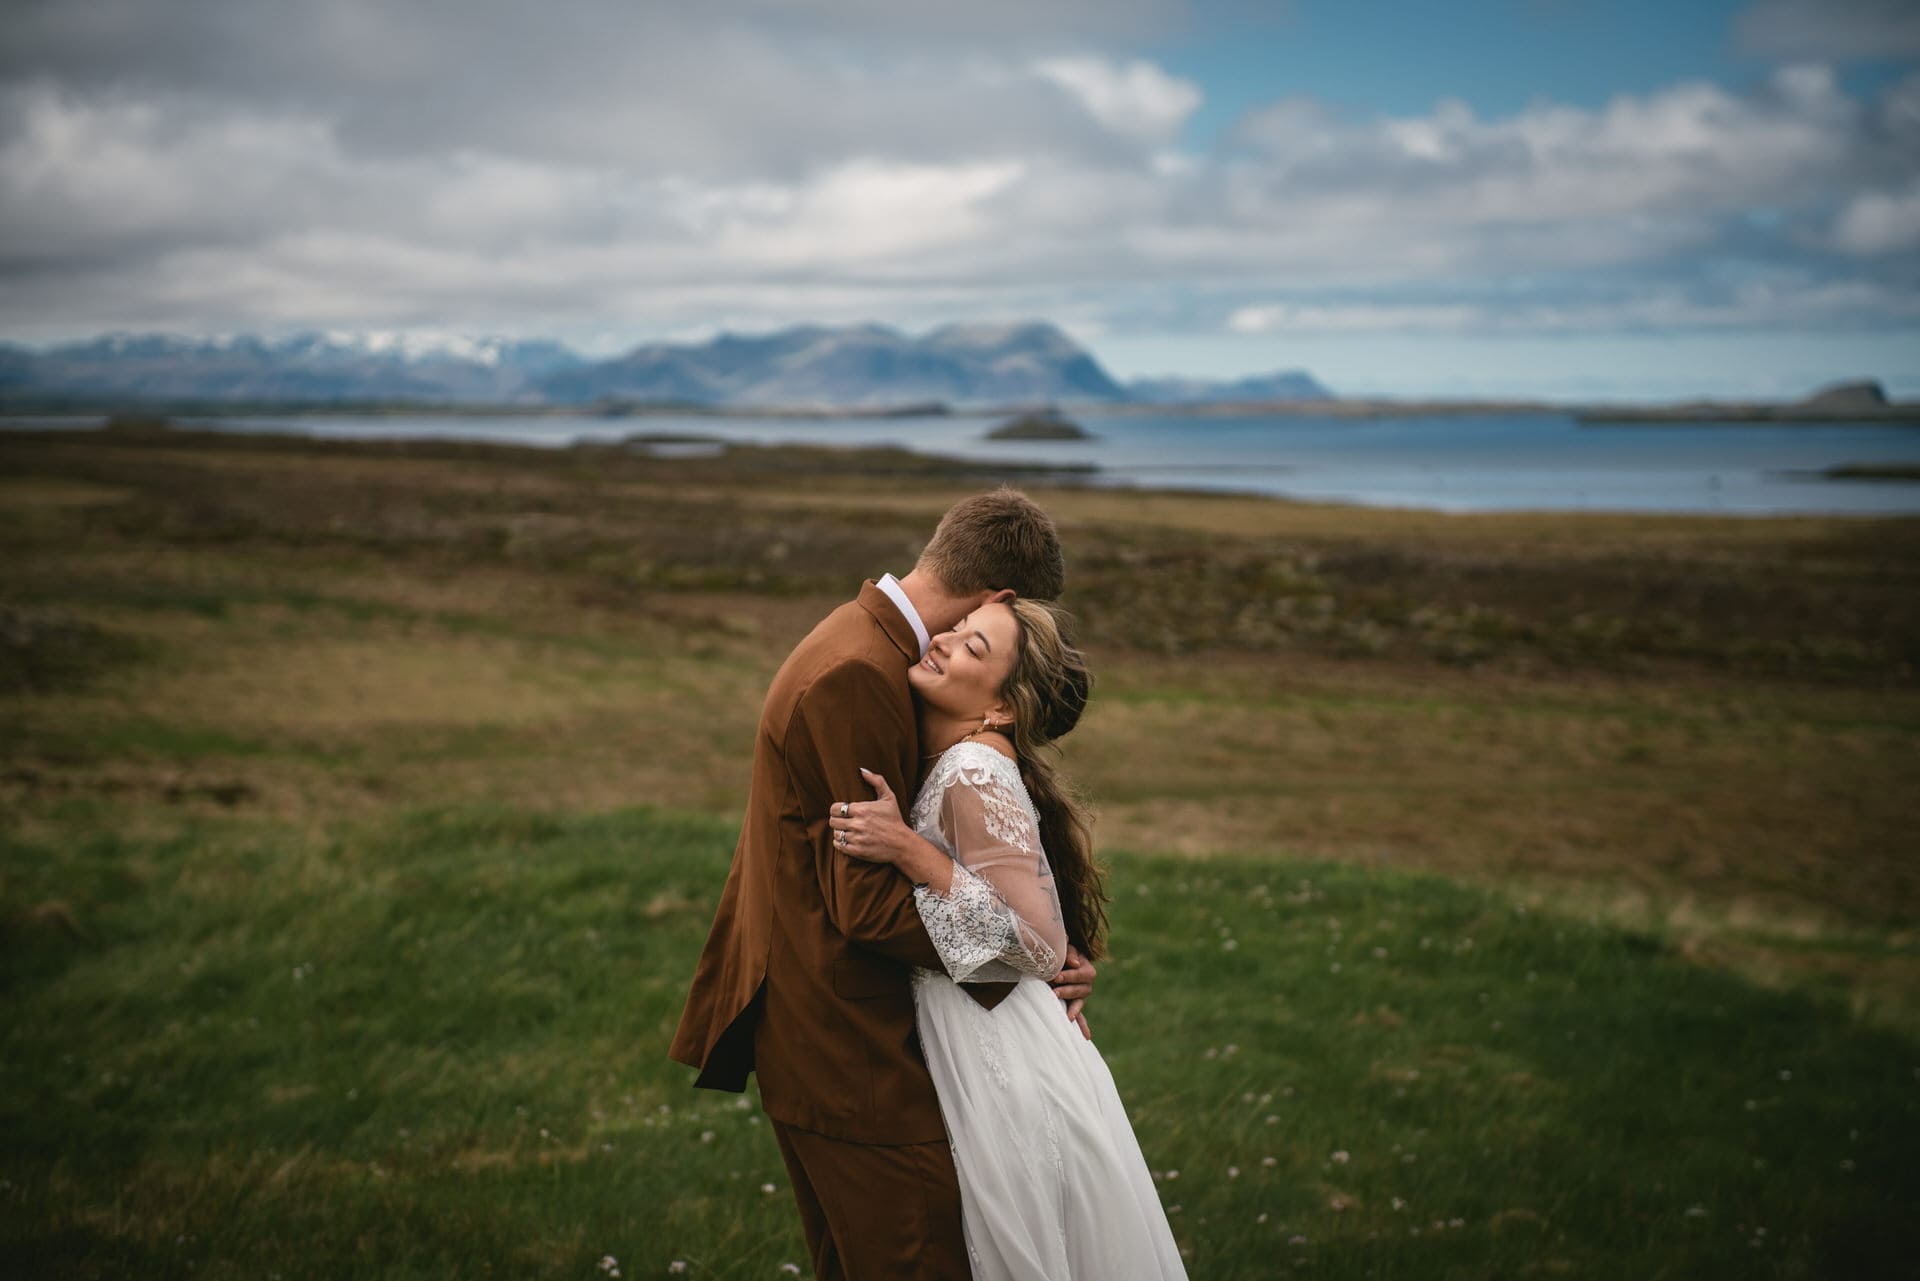 A kiss shared against the backdrop of Iceland's majestic Westfjords.